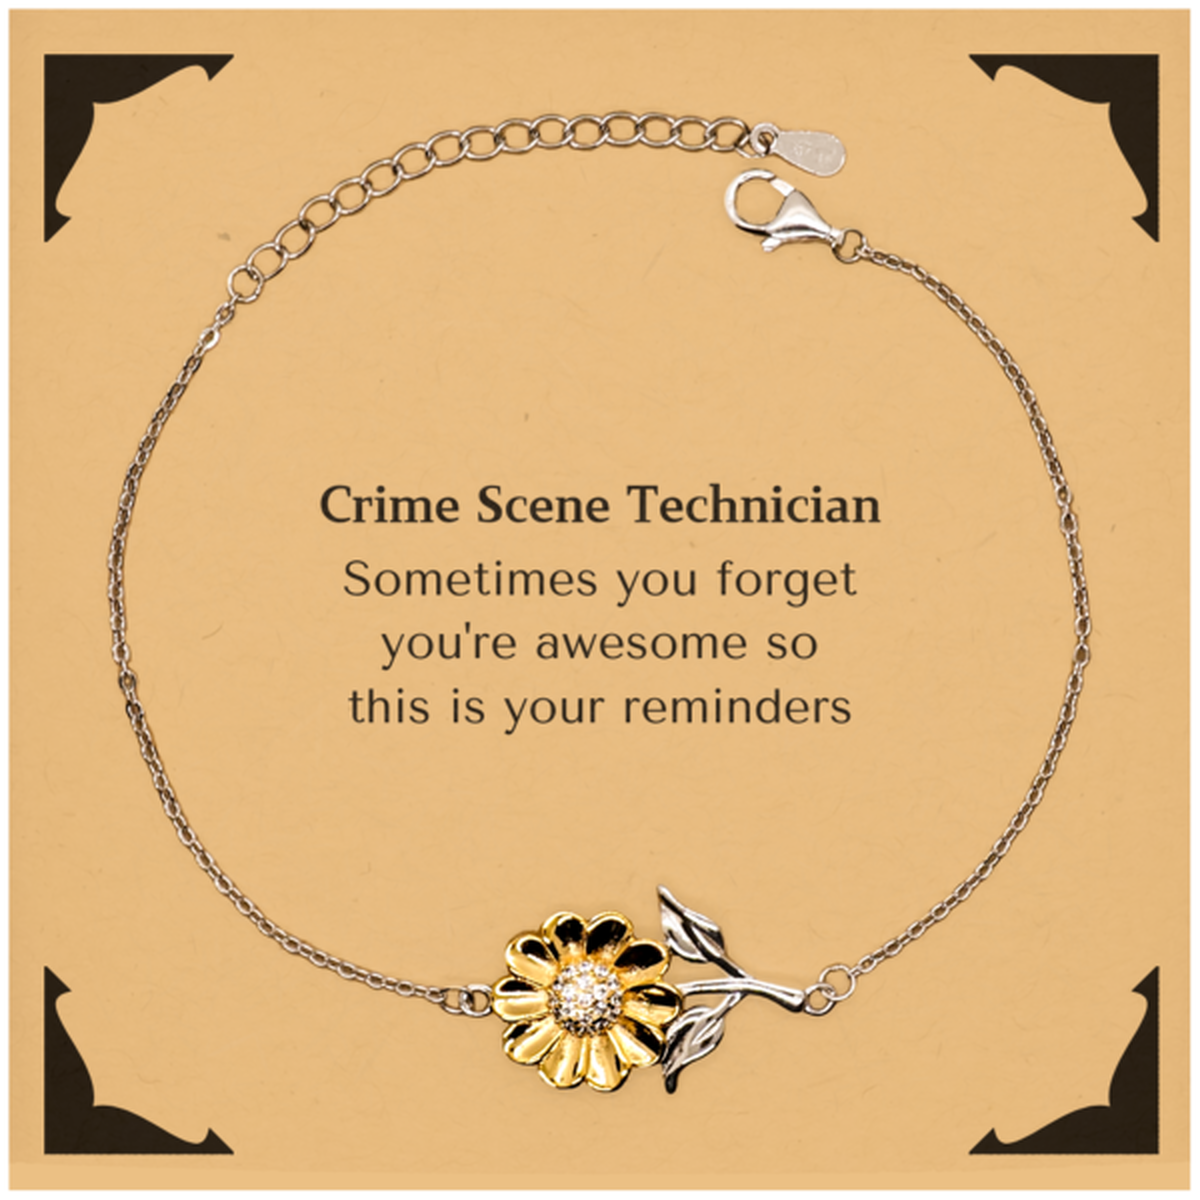 Sentimental Crime Scene Technician Sunflower Bracelet, Crime Scene Technician Sometimes you forget you're awesome so this is your reminders, Graduation Christmas Birthday Gifts for Crime Scene Technician, Men, Women, Coworkers